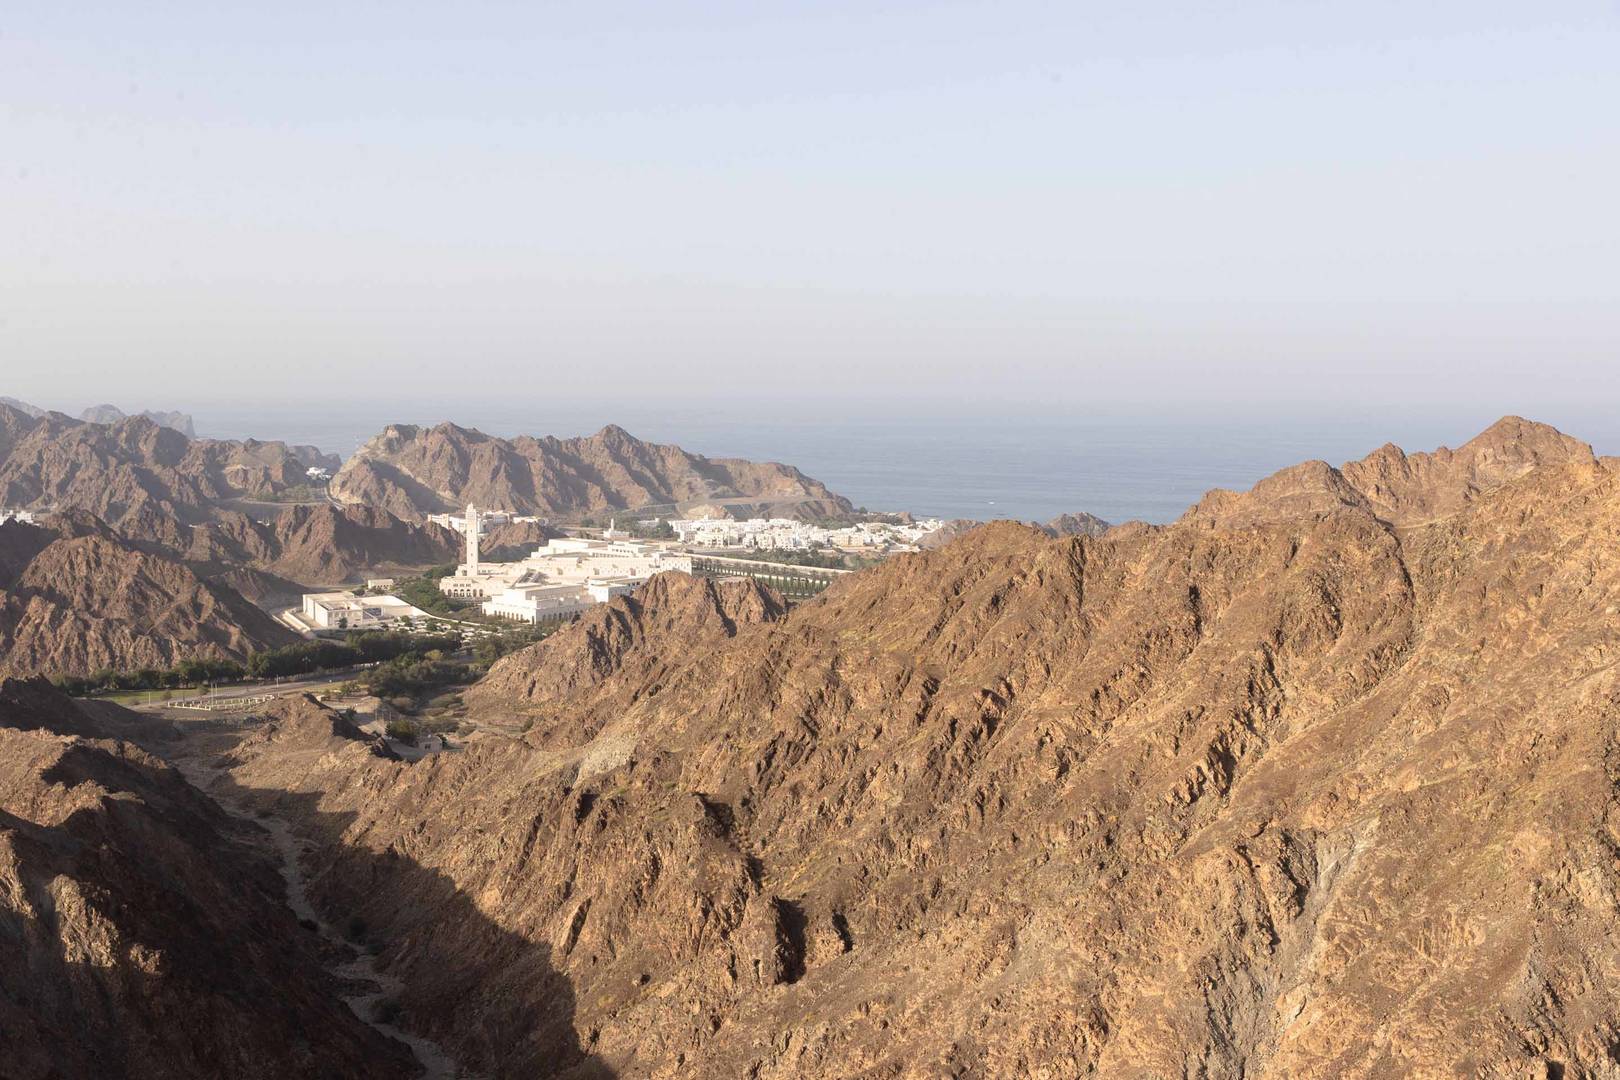 The mountains over Muscat Bay